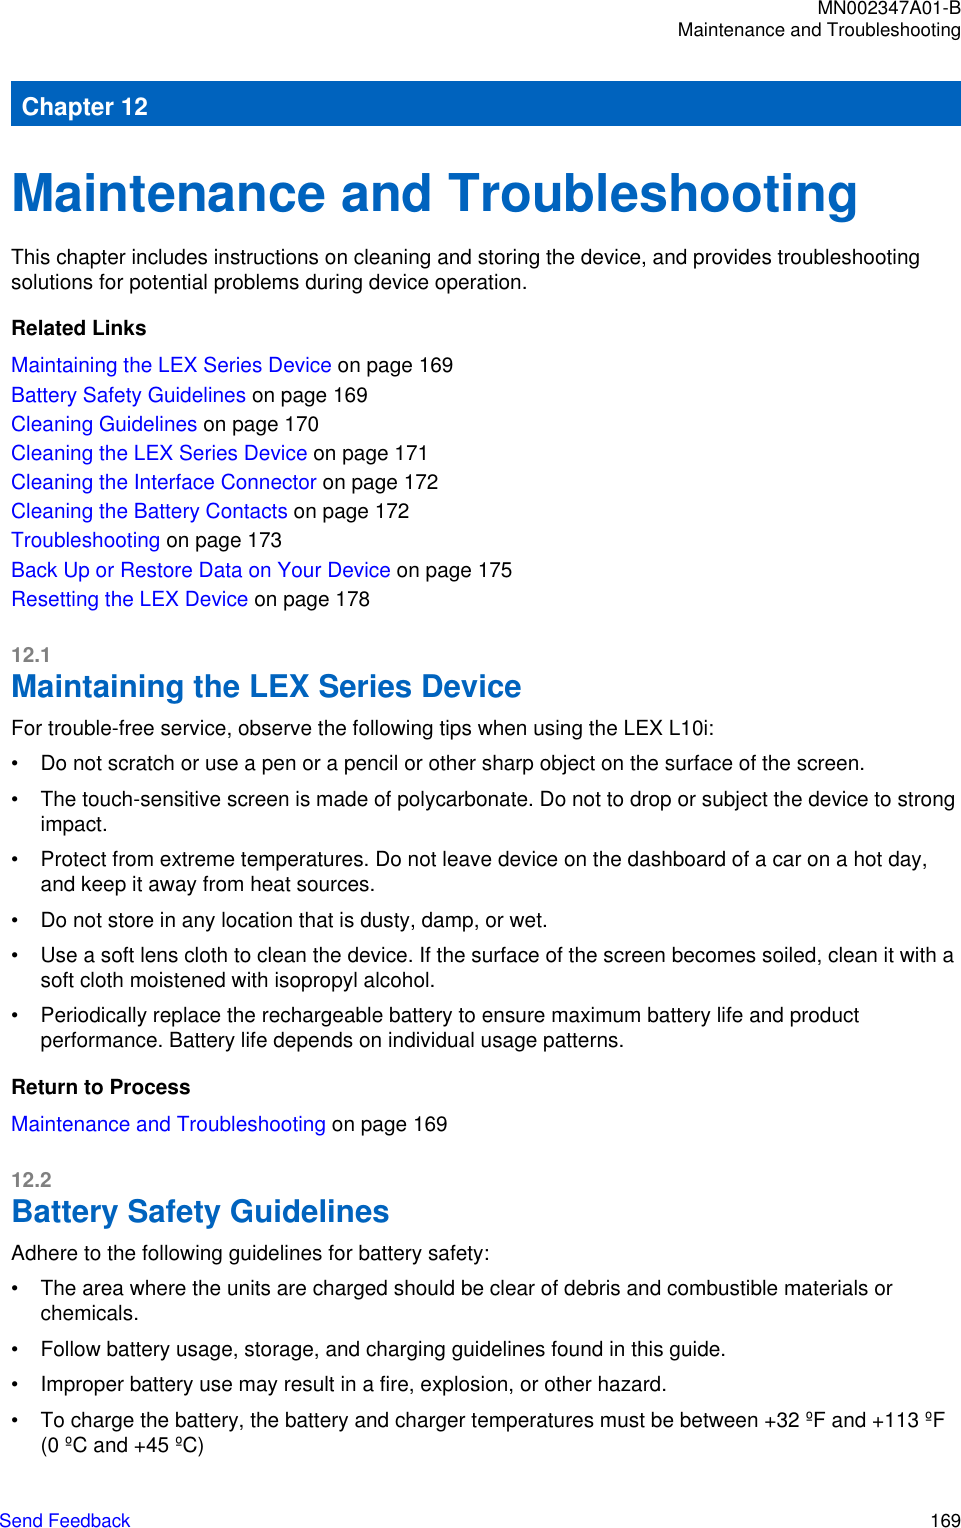 Chapter 12Maintenance and TroubleshootingThis chapter includes instructions on cleaning and storing the device, and provides troubleshootingsolutions for potential problems during device operation.Related LinksMaintaining the LEX Series Device on page 169Battery Safety Guidelines on page 169Cleaning Guidelines on page 170Cleaning the LEX Series Device on page 171Cleaning the Interface Connector on page 172Cleaning the Battery Contacts on page 172Troubleshooting on page 173Back Up or Restore Data on Your Device on page 175Resetting the LEX Device on page 17812.1Maintaining the LEX Series DeviceFor trouble-free service, observe the following tips when using the LEX L10i:• Do not scratch or use a pen or a pencil or other sharp object on the surface of the screen.• The touch-sensitive screen is made of polycarbonate. Do not to drop or subject the device to strongimpact.• Protect from extreme temperatures. Do not leave device on the dashboard of a car on a hot day,and keep it away from heat sources.• Do not store in any location that is dusty, damp, or wet.• Use a soft lens cloth to clean the device. If the surface of the screen becomes soiled, clean it with asoft cloth moistened with isopropyl alcohol.• Periodically replace the rechargeable battery to ensure maximum battery life and productperformance. Battery life depends on individual usage patterns.Return to ProcessMaintenance and Troubleshooting on page 16912.2Battery Safety GuidelinesAdhere to the following guidelines for battery safety:• The area where the units are charged should be clear of debris and combustible materials orchemicals.• Follow battery usage, storage, and charging guidelines found in this guide.• Improper battery use may result in a fire, explosion, or other hazard.• To charge the battery, the battery and charger temperatures must be between +32 ºF and +113 ºF(0 ºC and +45 ºC)MN002347A01-BMaintenance and TroubleshootingSend Feedback   169